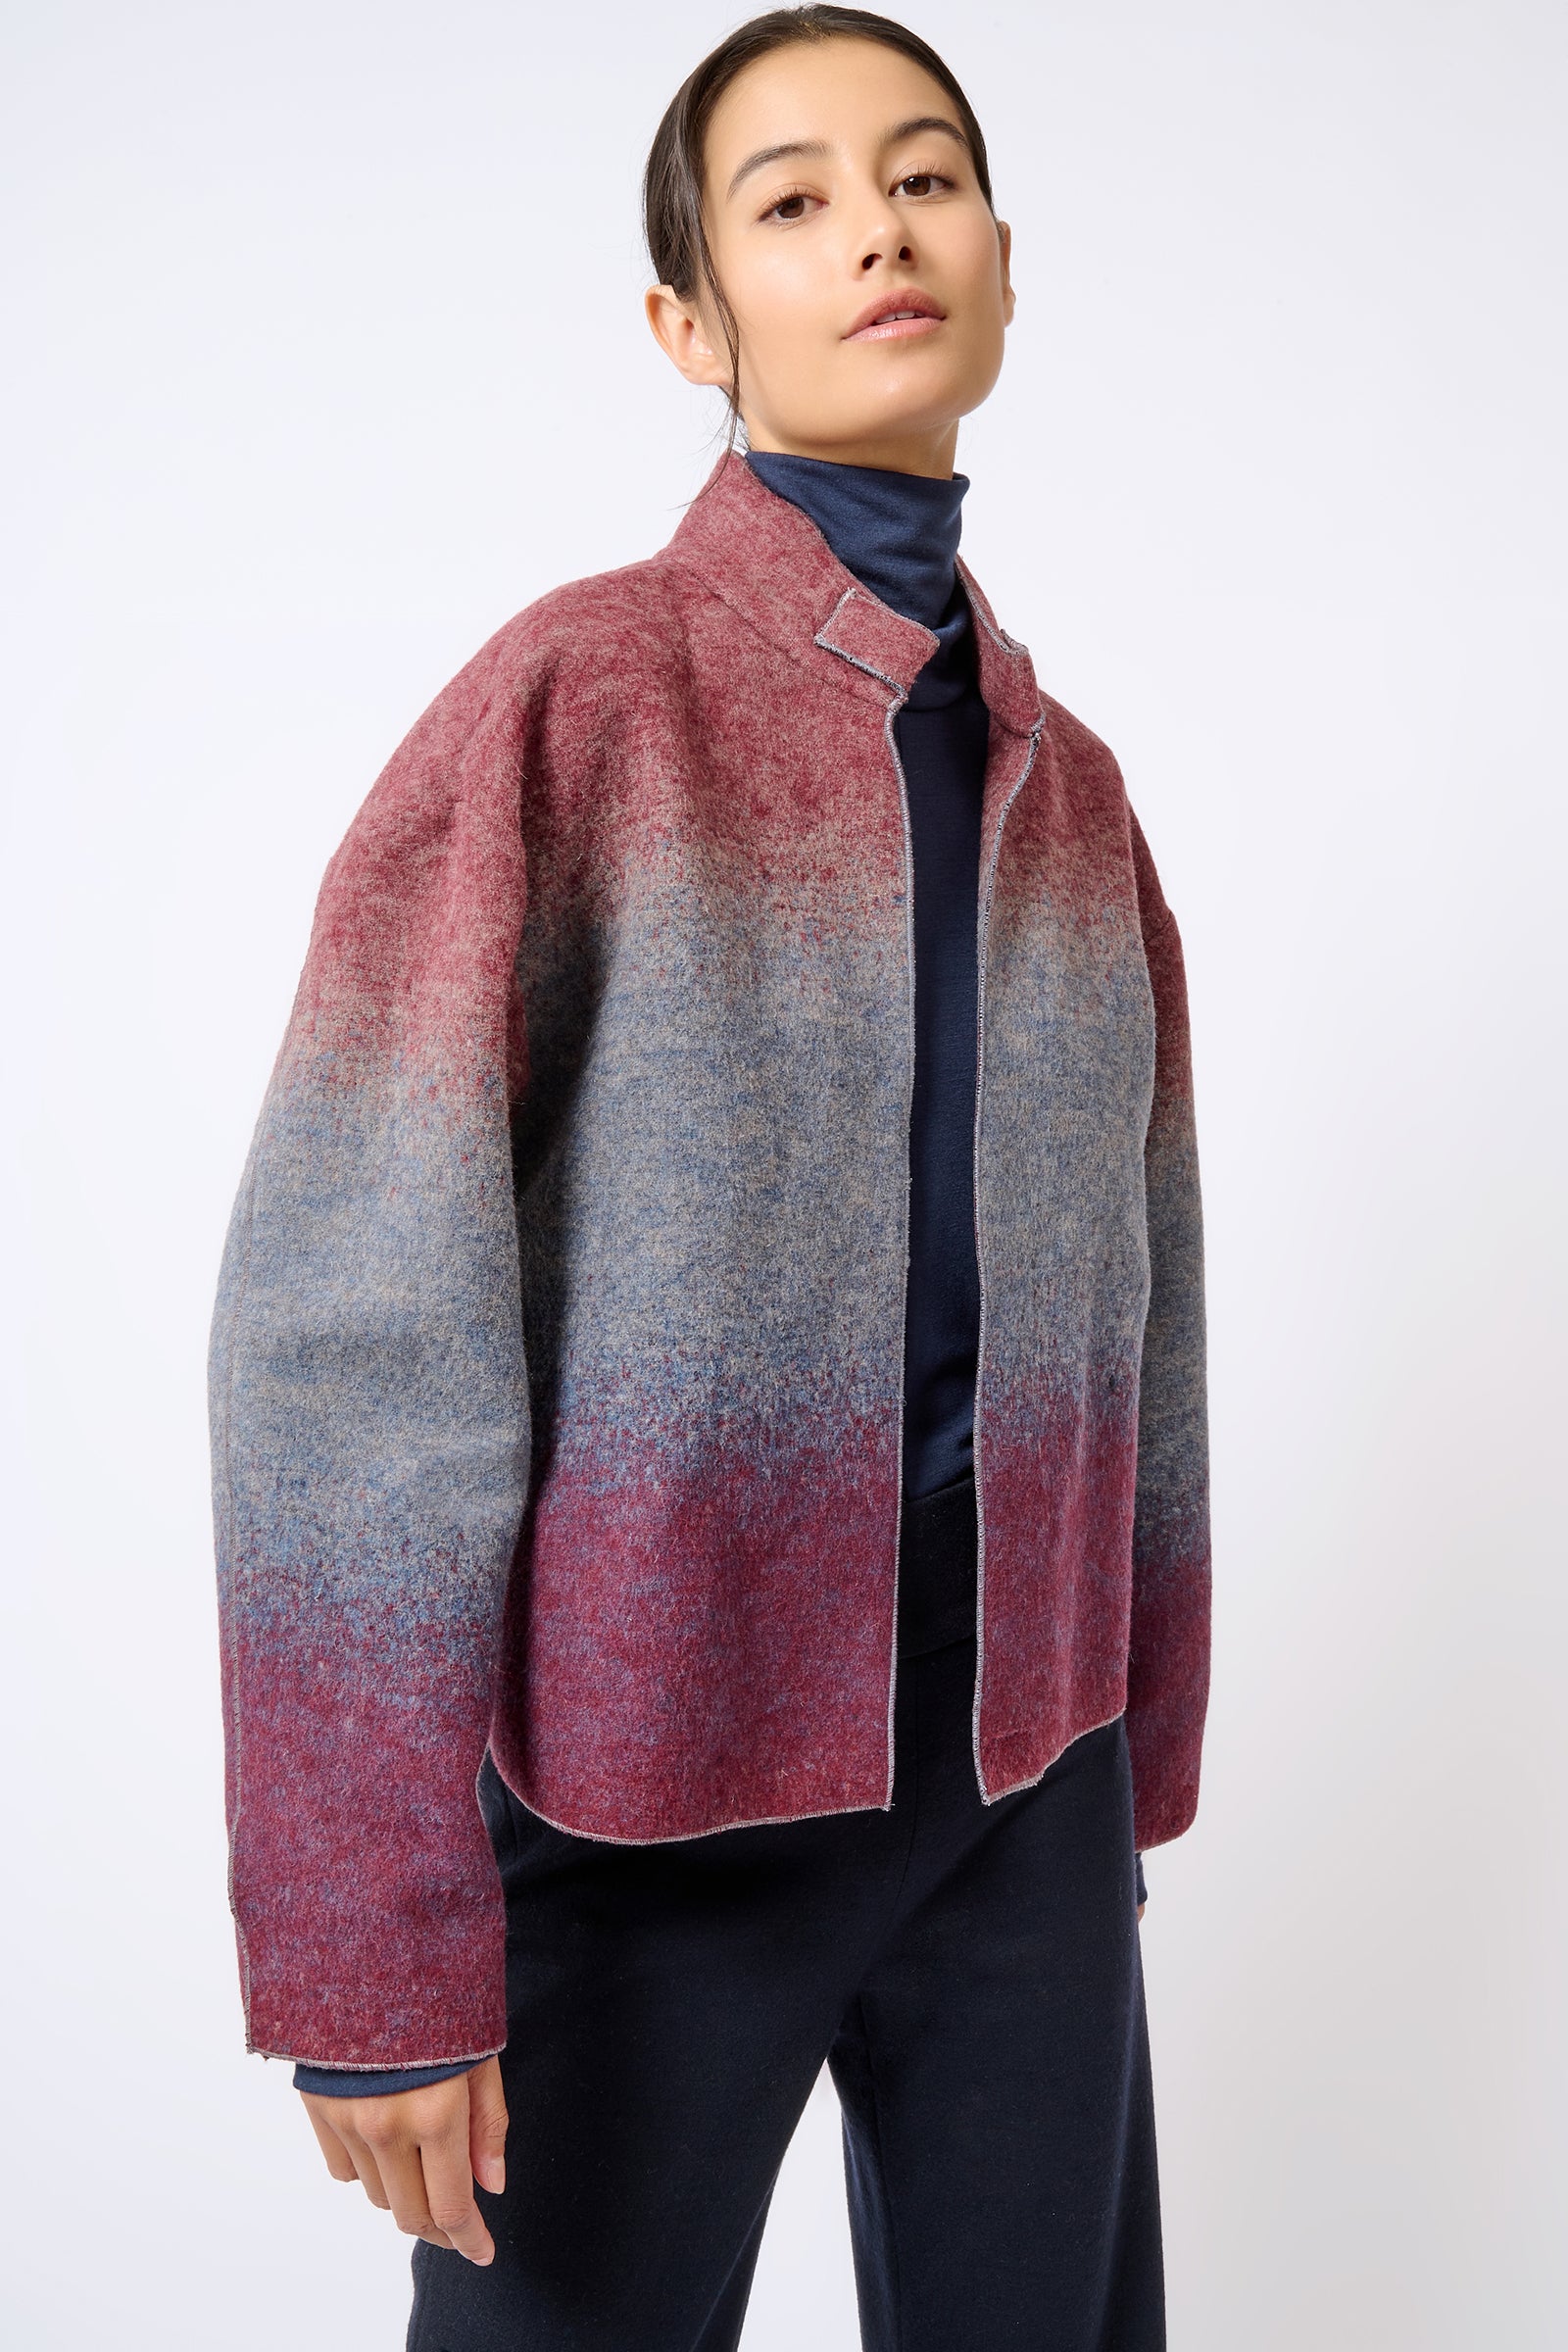 Kal Rieman Kasey Ombre Bomber in Ombre on Model Front Side View